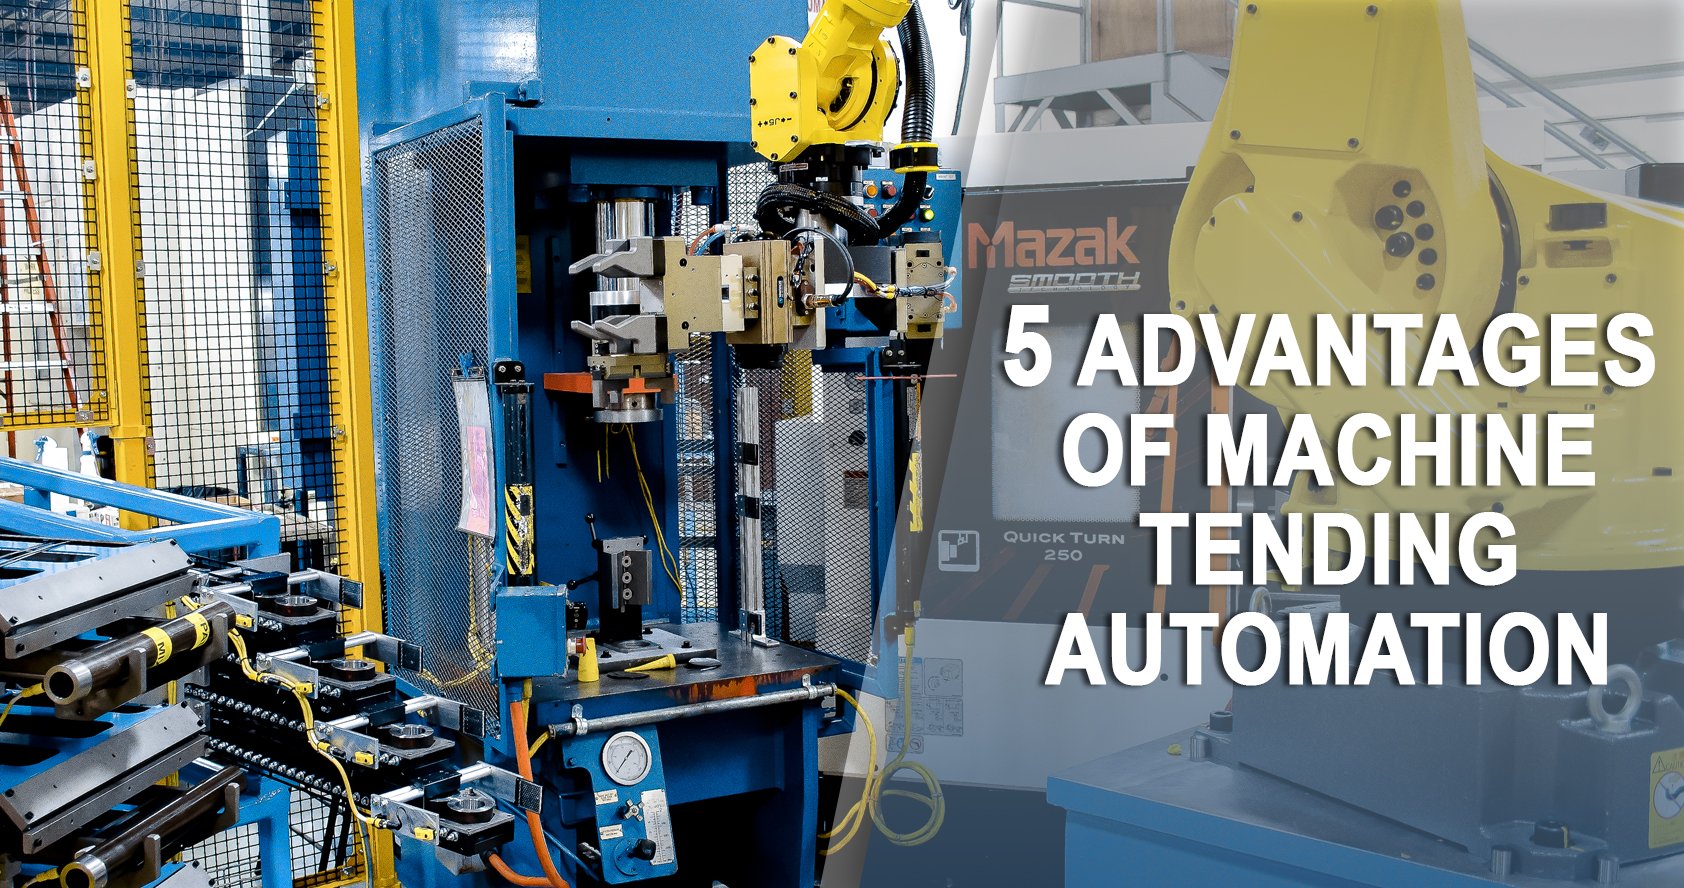 automated operation of industrial machine tools in a manufacturing plant